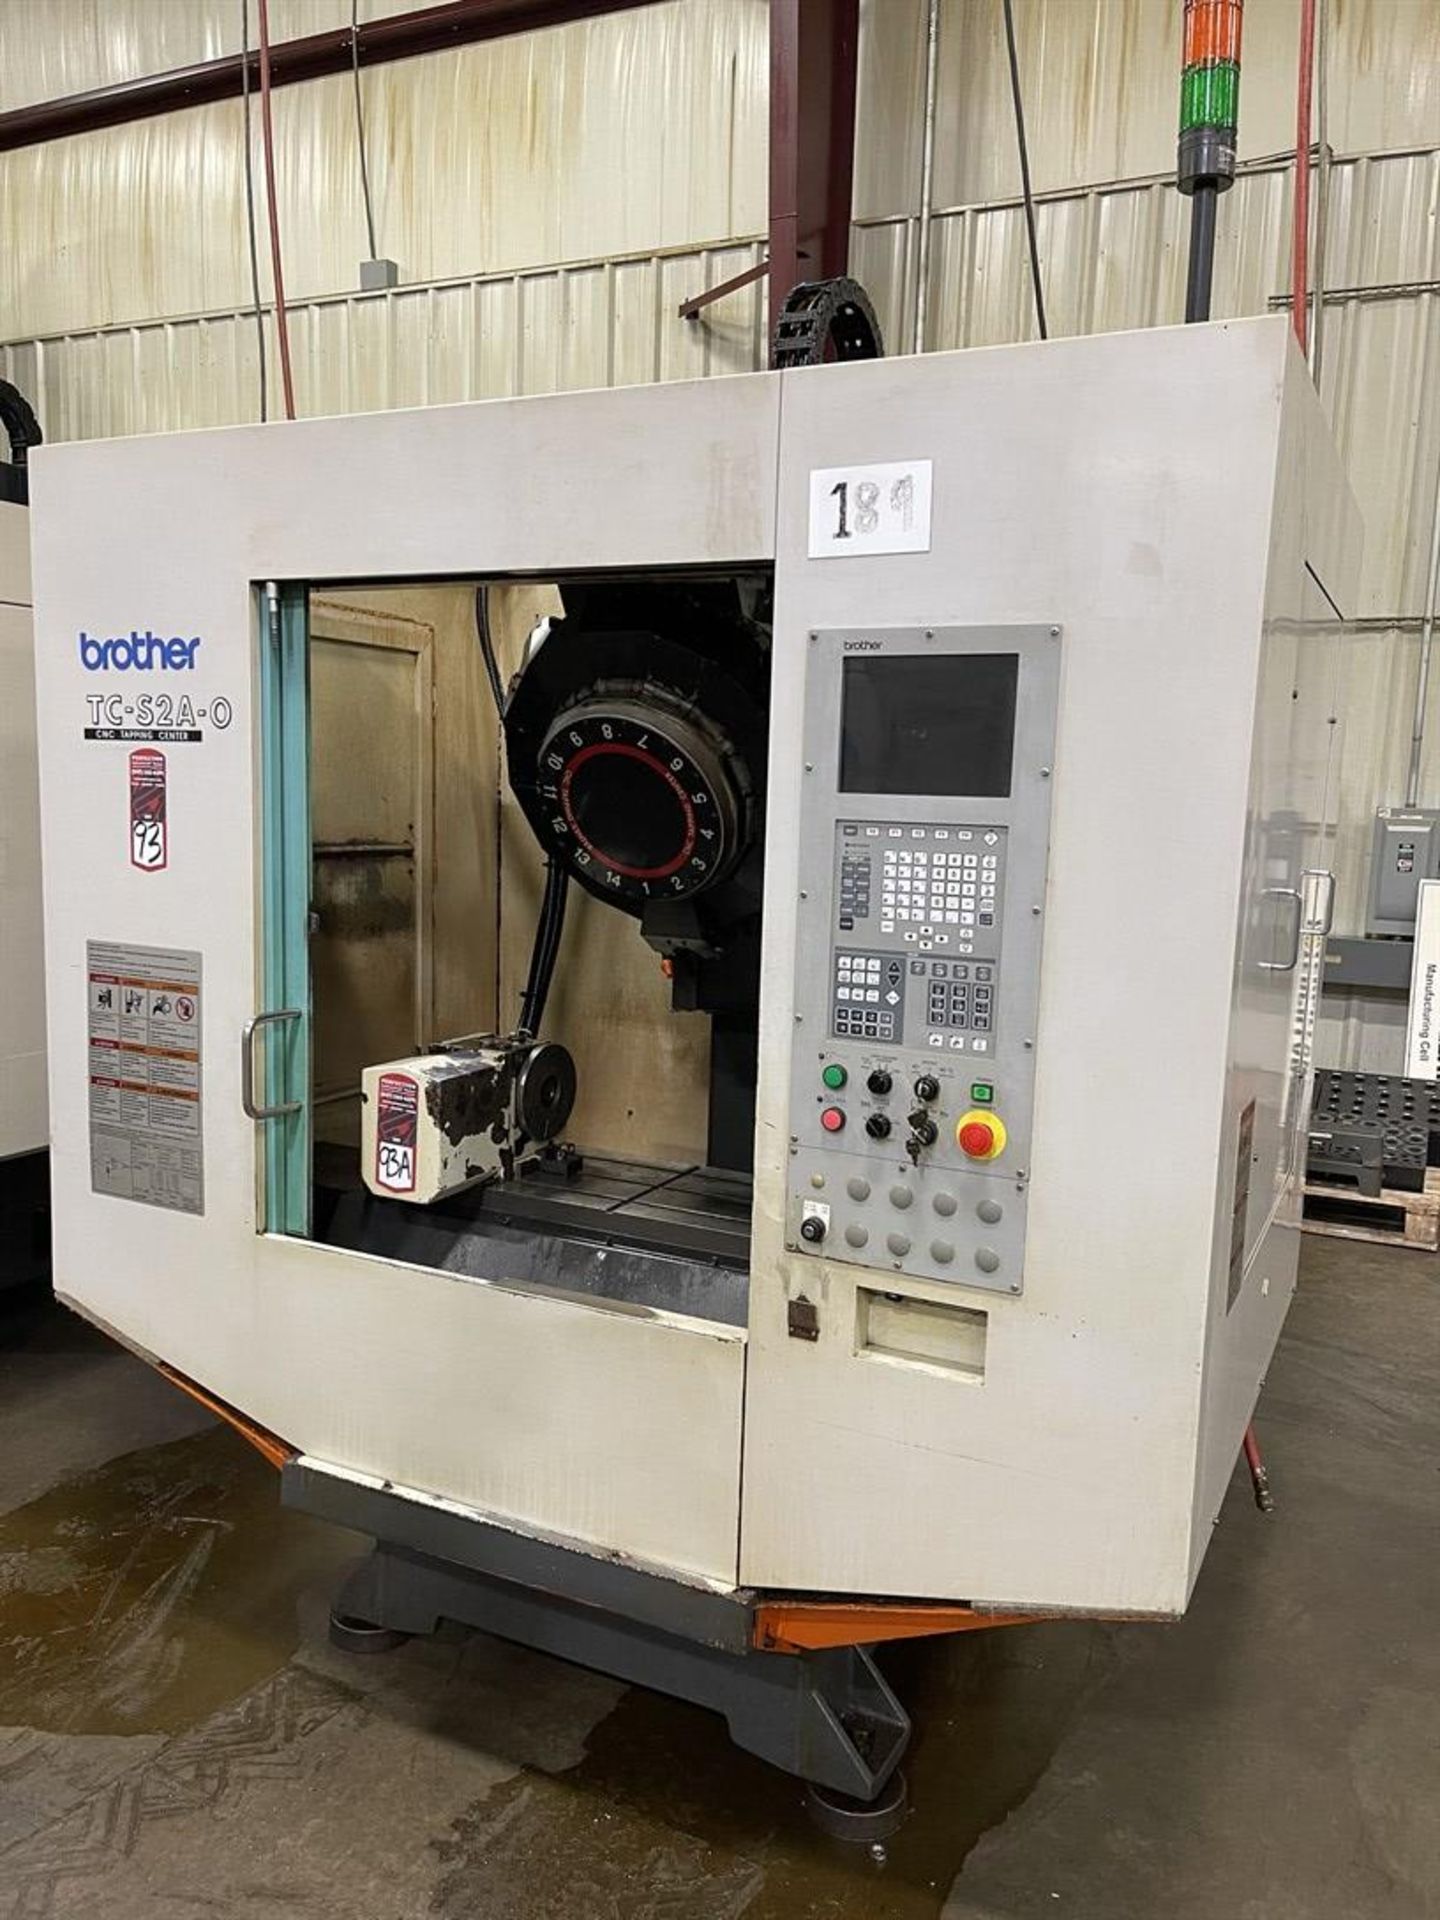 2003 BROTHER TC-S2A-O CNC Tapping Center, s/n 113894, 12.5" x 31.5" Table, 14-ATC, BT30 Spindle